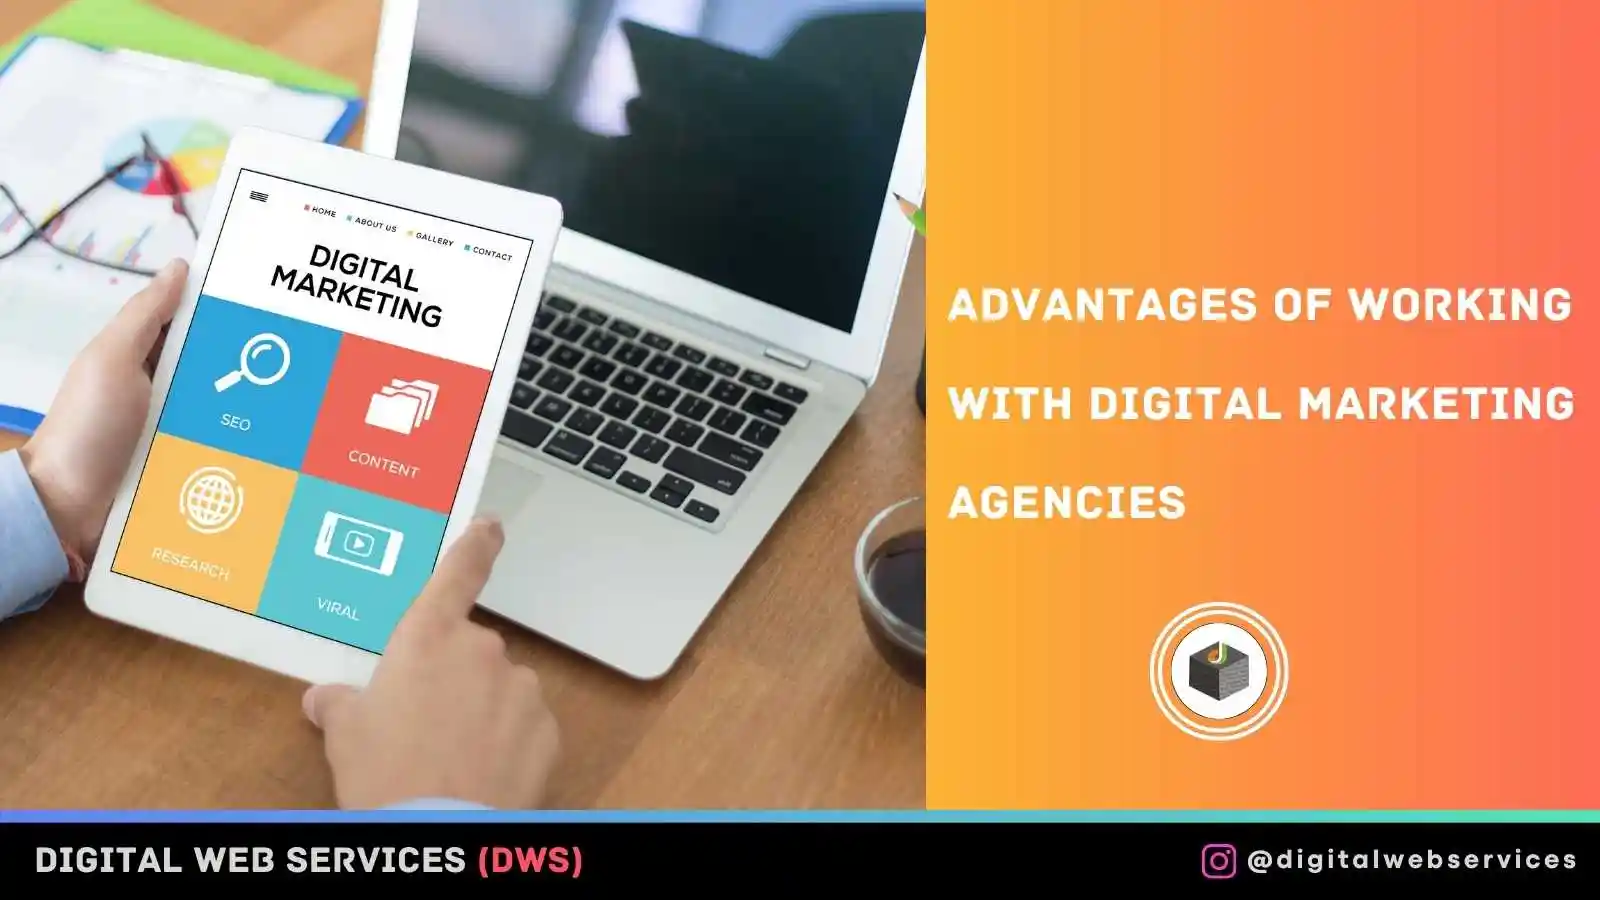 Advantages of Working with Digital Marketing Agencies